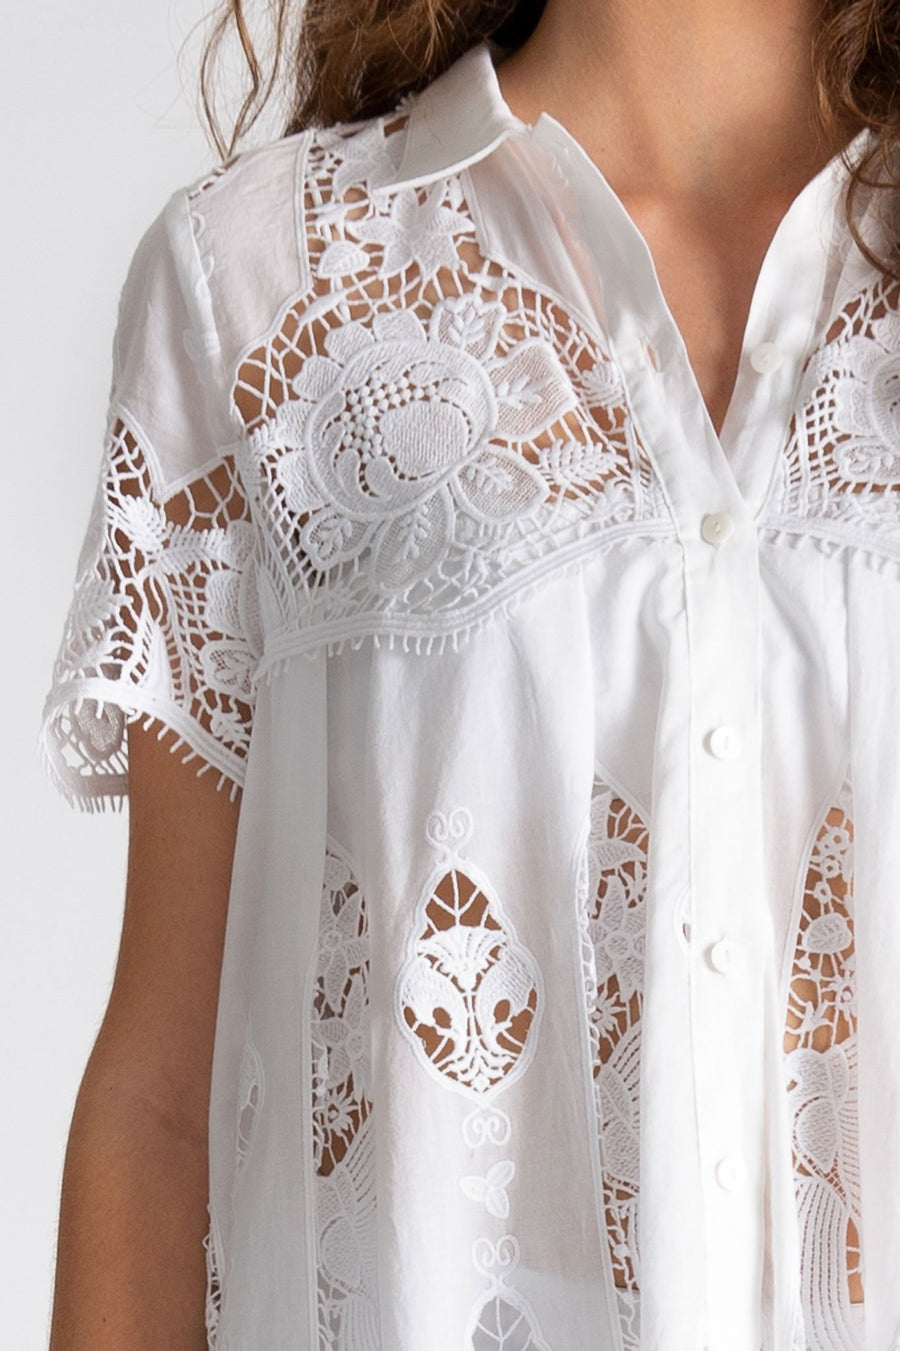 This is a detail photo of the white lace embroidery inspired by hibiscus flowers. The linen collar and button down front are visible here on the babydoll coverup dress.